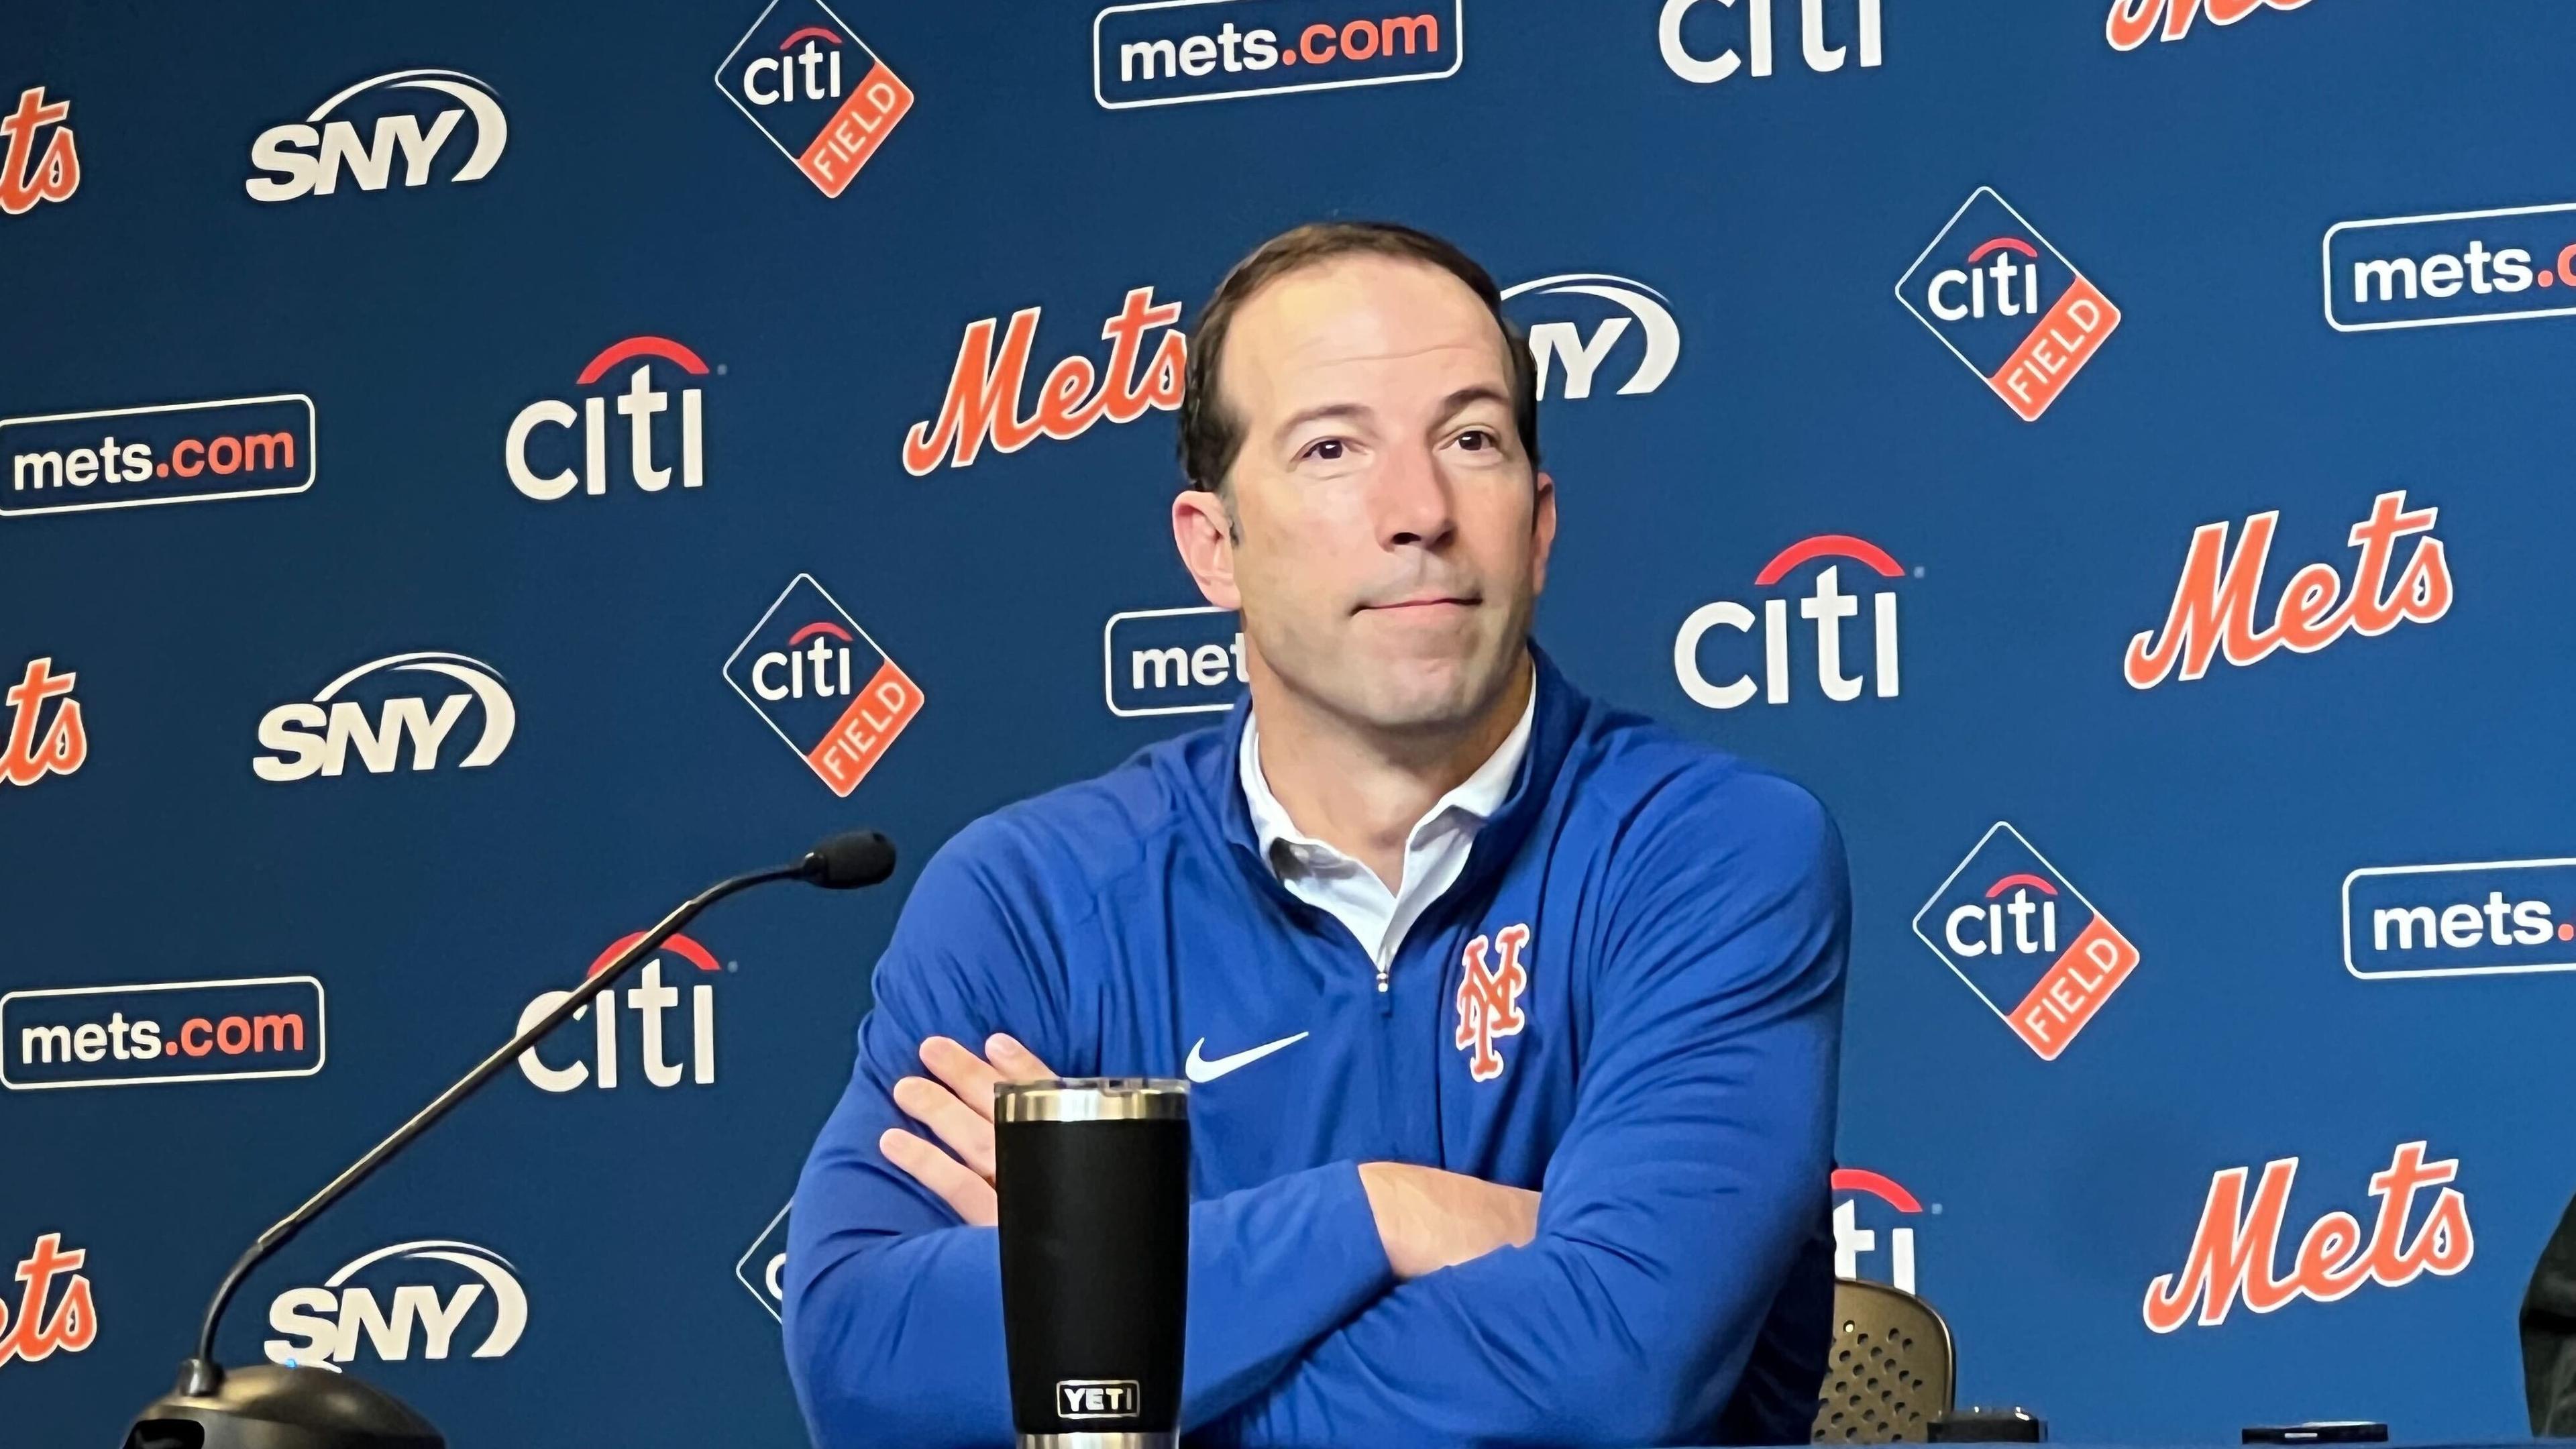 Billy Eppler speaking to the media during Mets end of season news conference on Oct. 14, 2022. / SNY